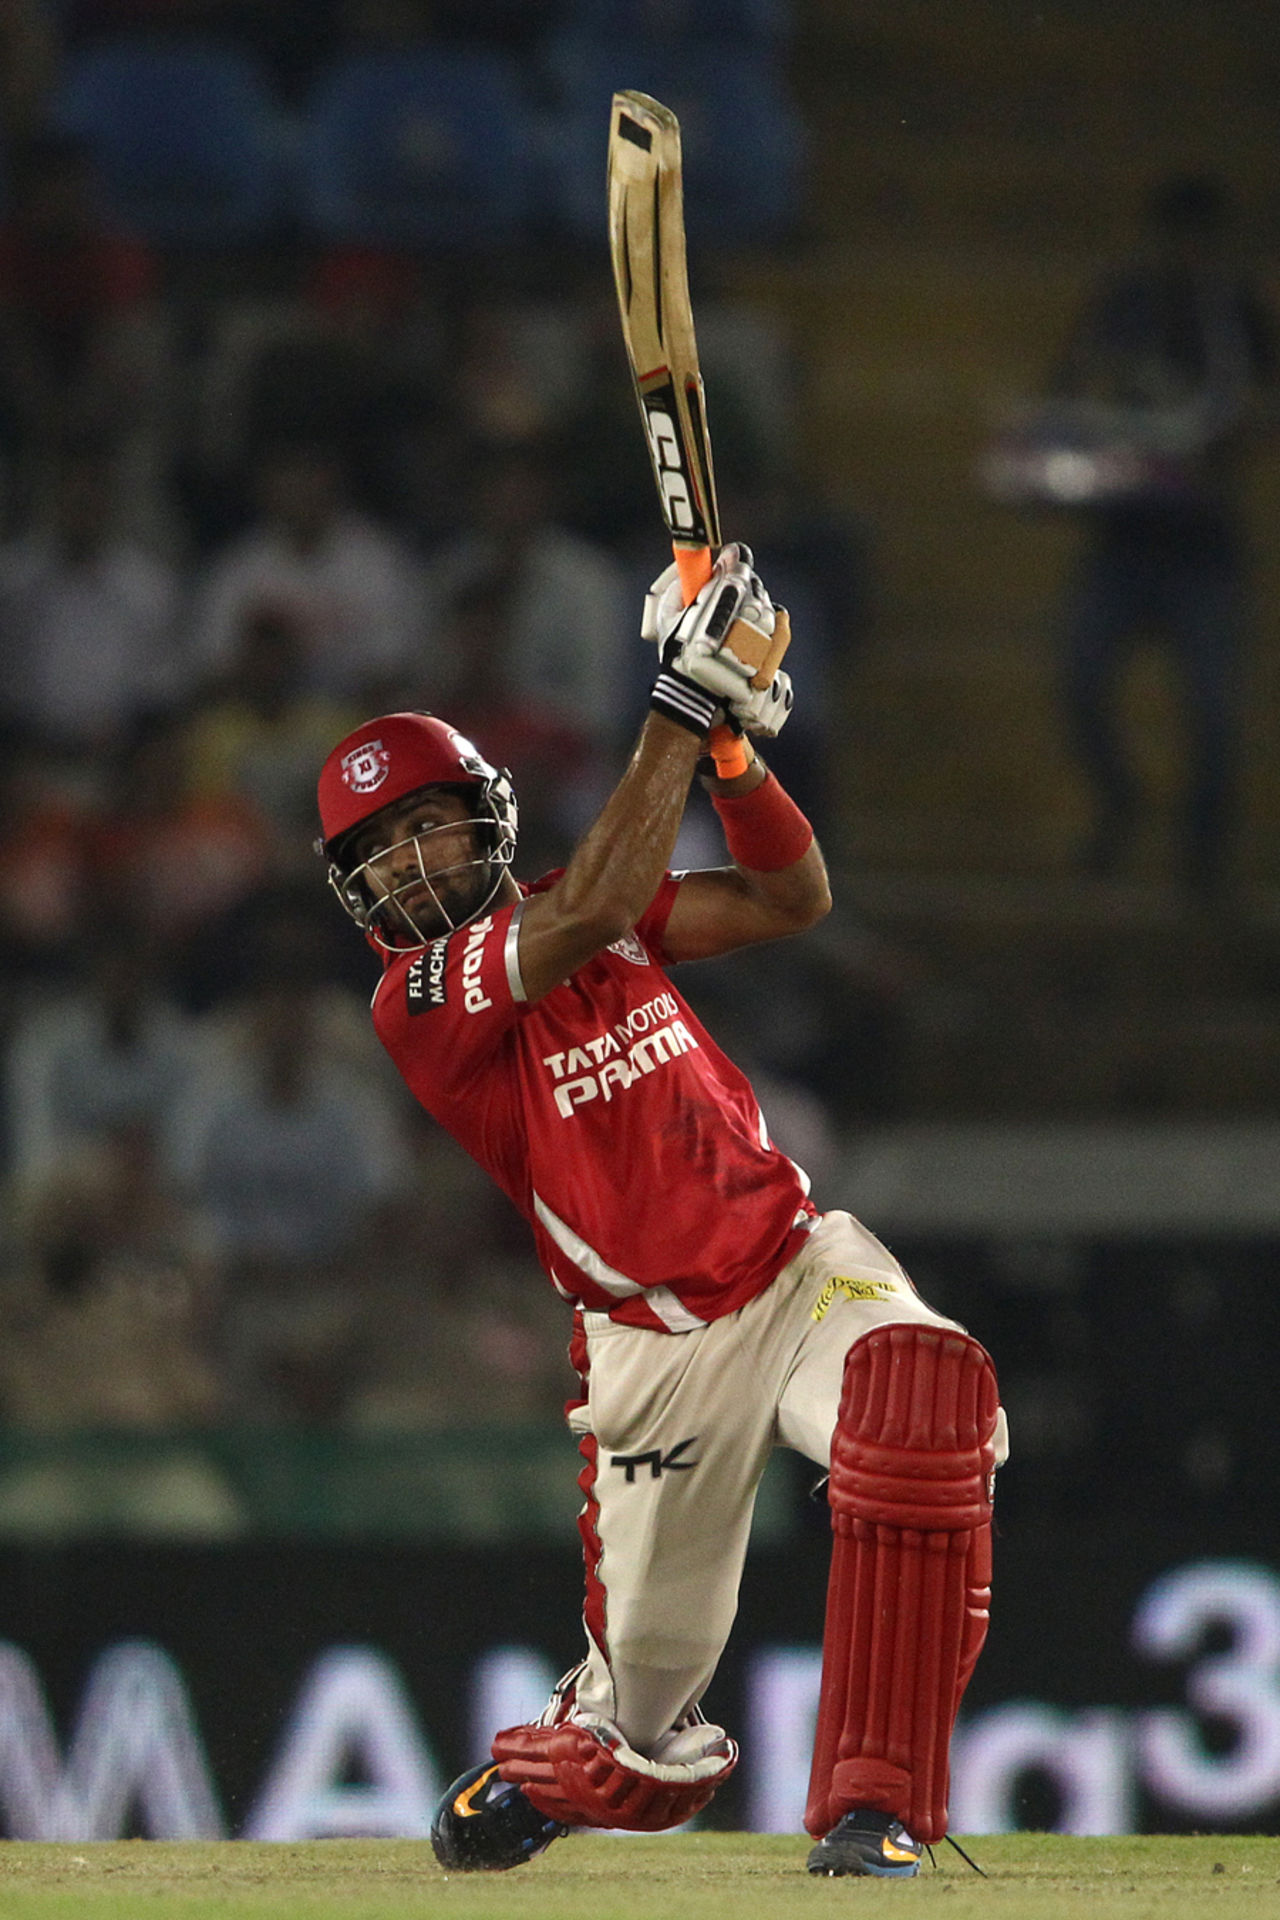 Manan Vohra carves one through the offside, Kings XI Punjab v Northern Knights, Champions League T20, Mohali, September 26, 2014